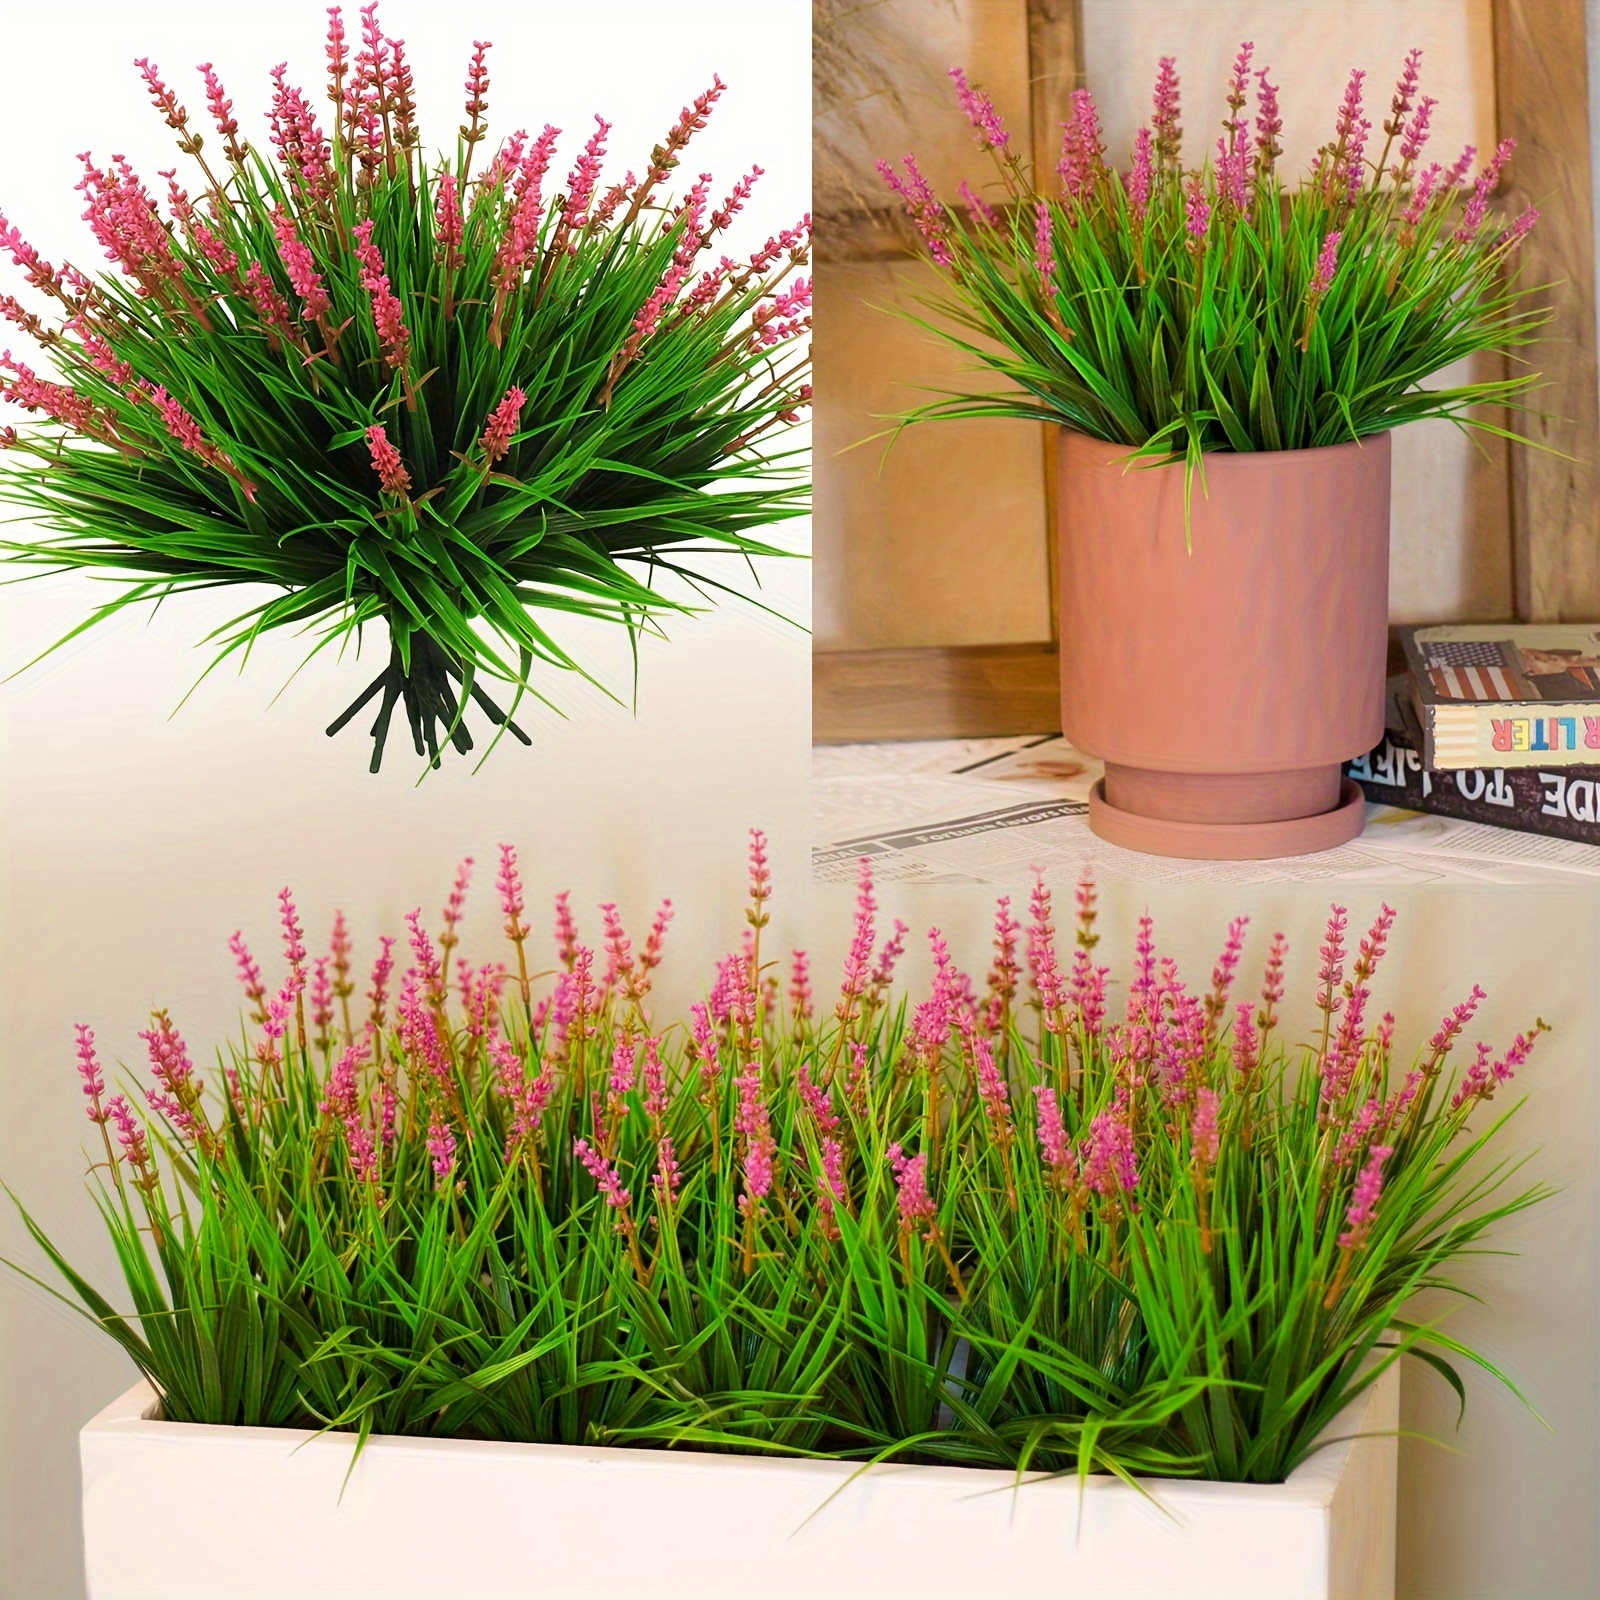 

12 Bundles Artificial Pink Plants, Outdoor Fake Monkey Grass With Flowers For Pot, Garden Verandah Decor For Window Garden Office Patio Hanging Planter Pathway Front Porch (grass With Flowers)